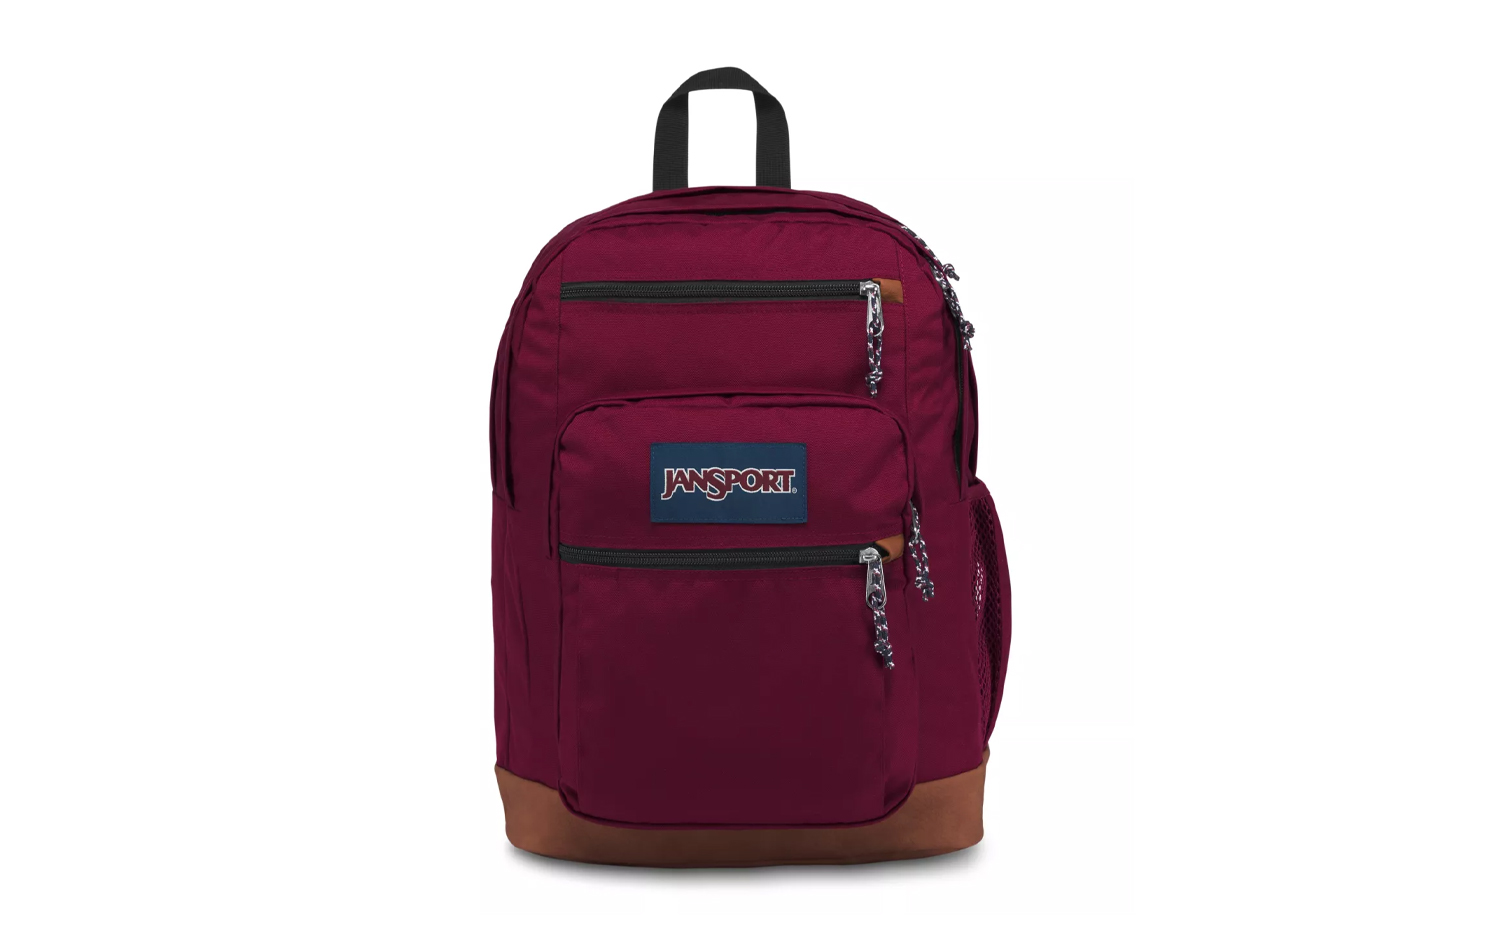 best back to school accessories for MacBook: JanSport Cool Student Backpack against a white background